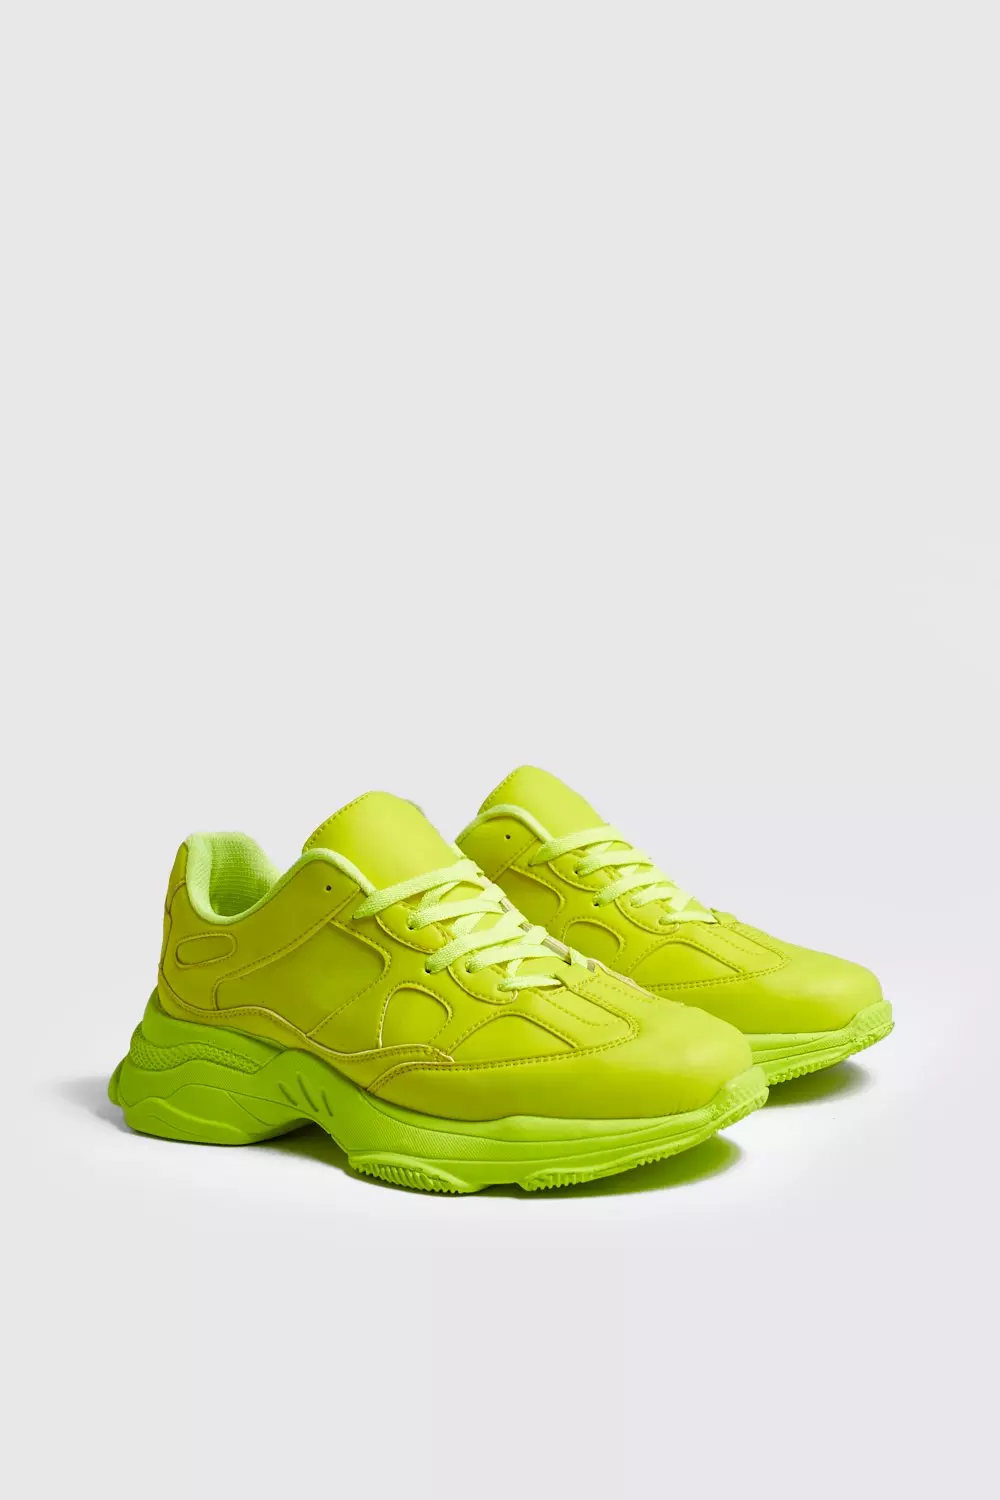 ASOS DESIGN Deejay chunky sole sneakers in yellow